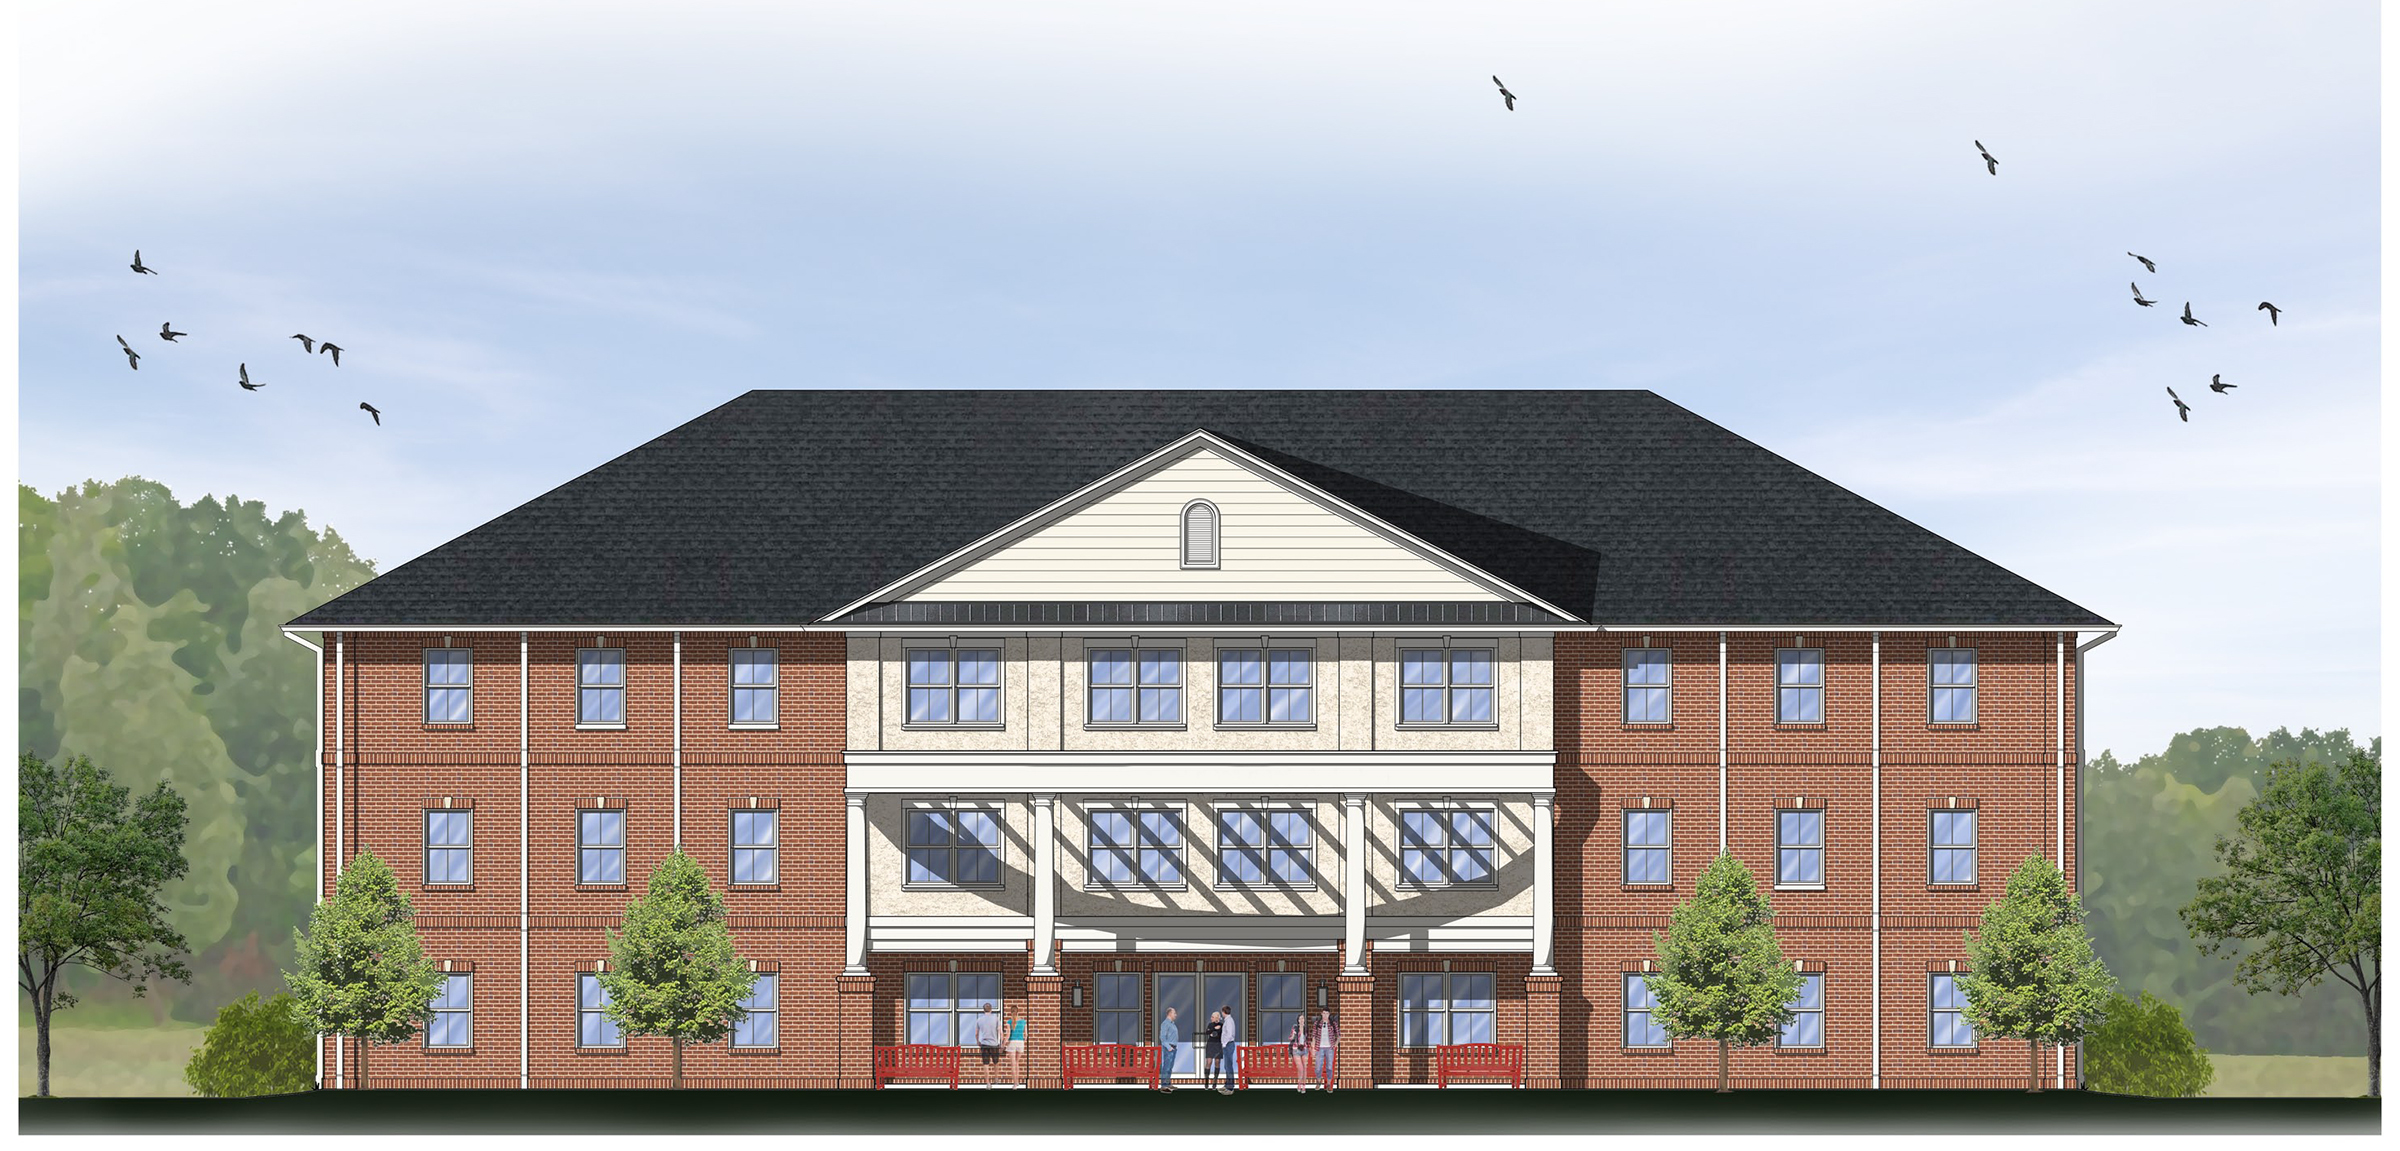 An illustration of the plans for the new residence hall